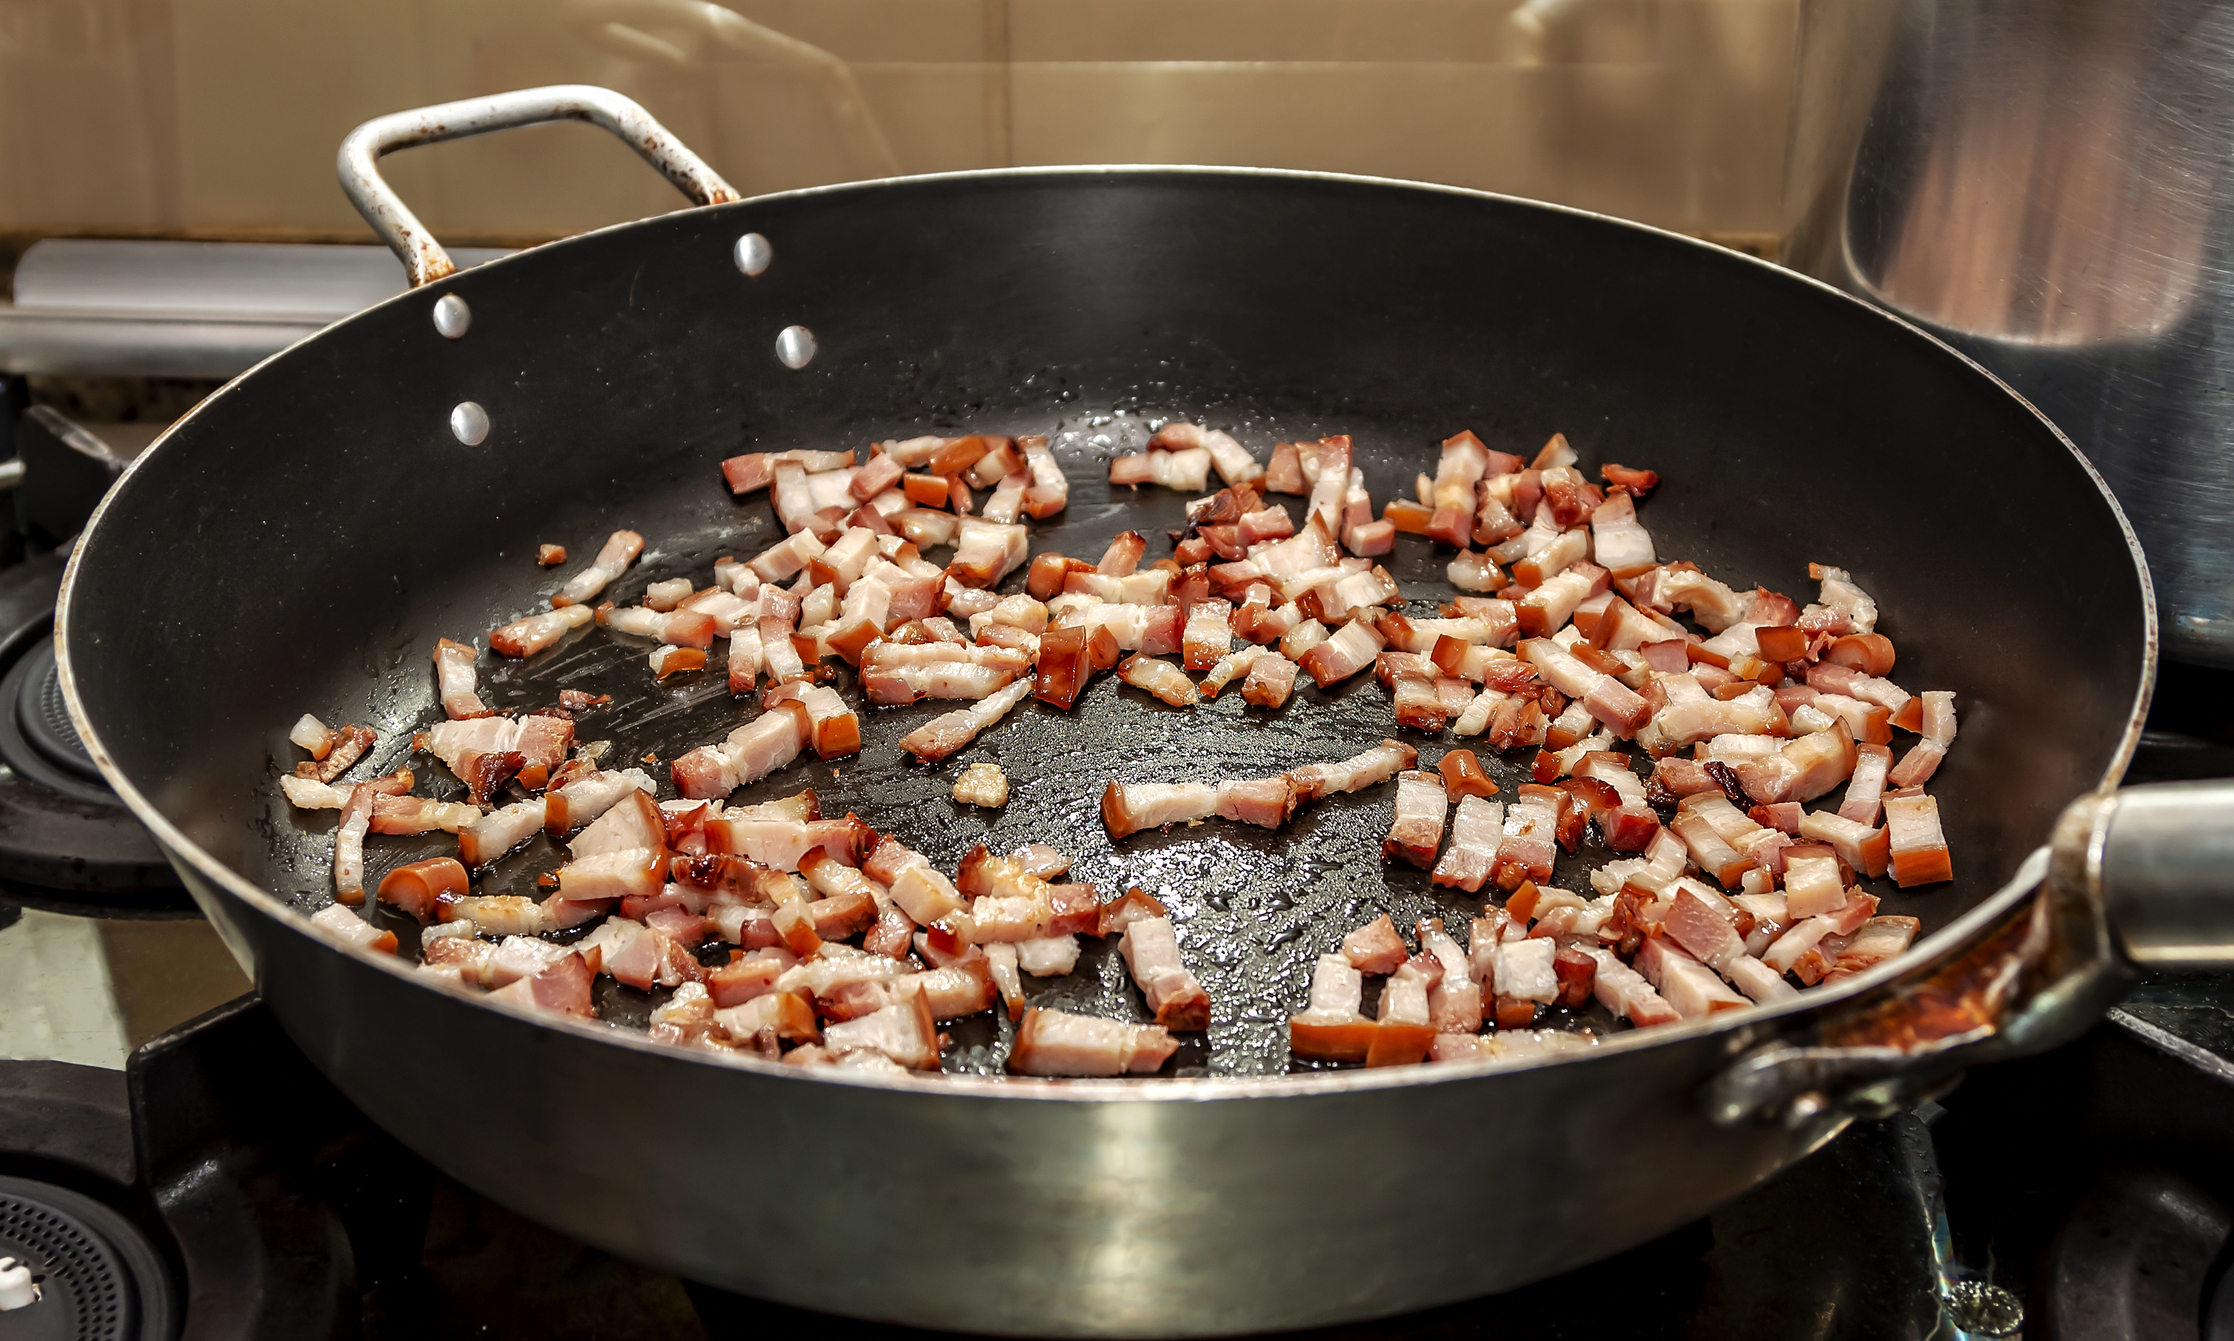 Bacon pieces sizzle in a frying pan on a stove